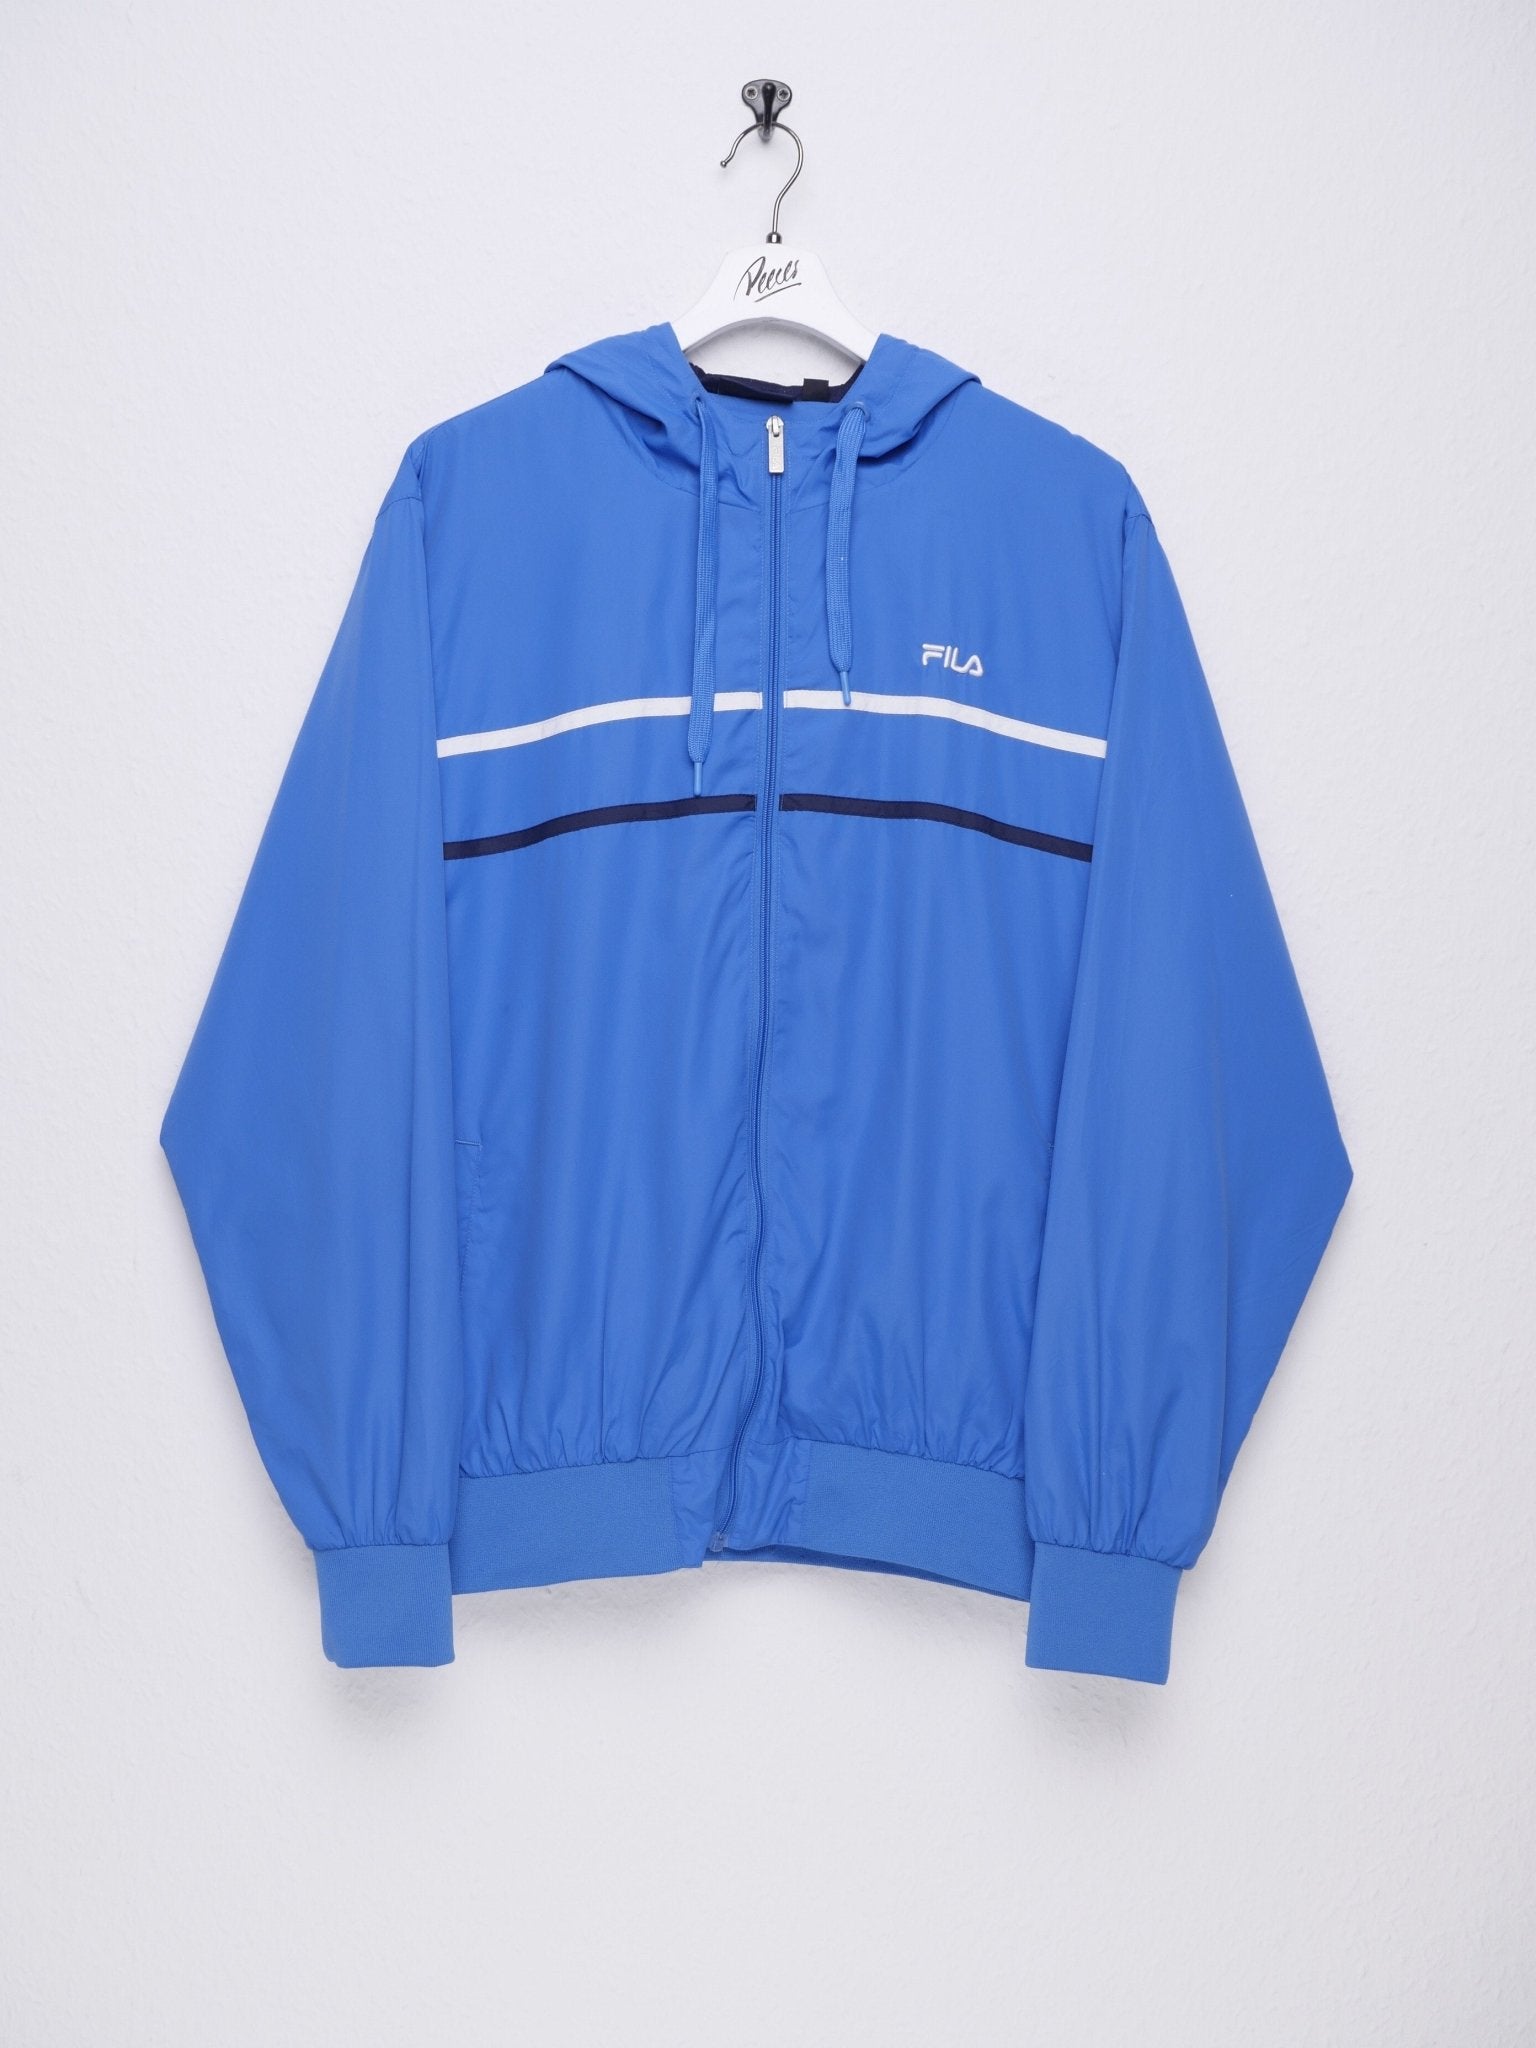 fila embroidered Spellout blue Track Jacket - Peeces